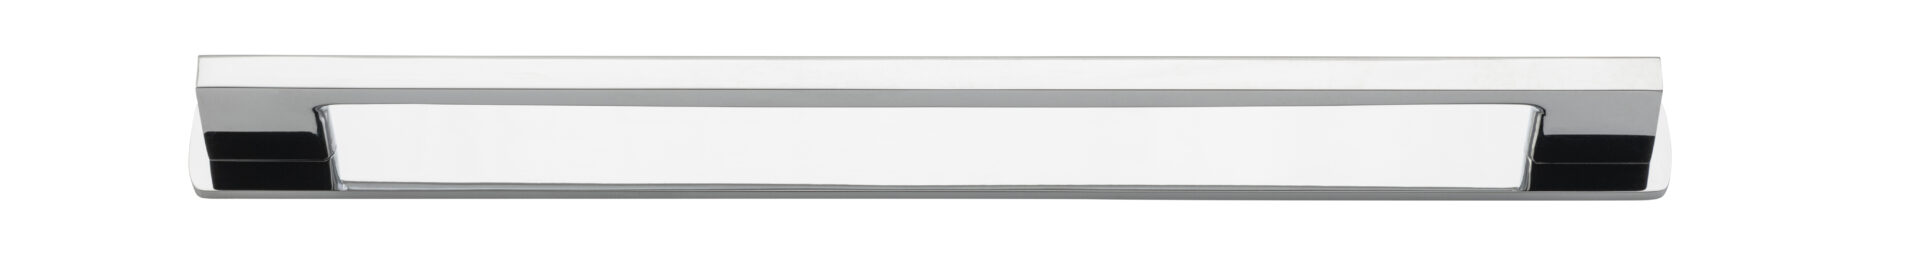 0533B - Cali Cabinet Pull with Backplate - CTC 256mm - Polished Chrome